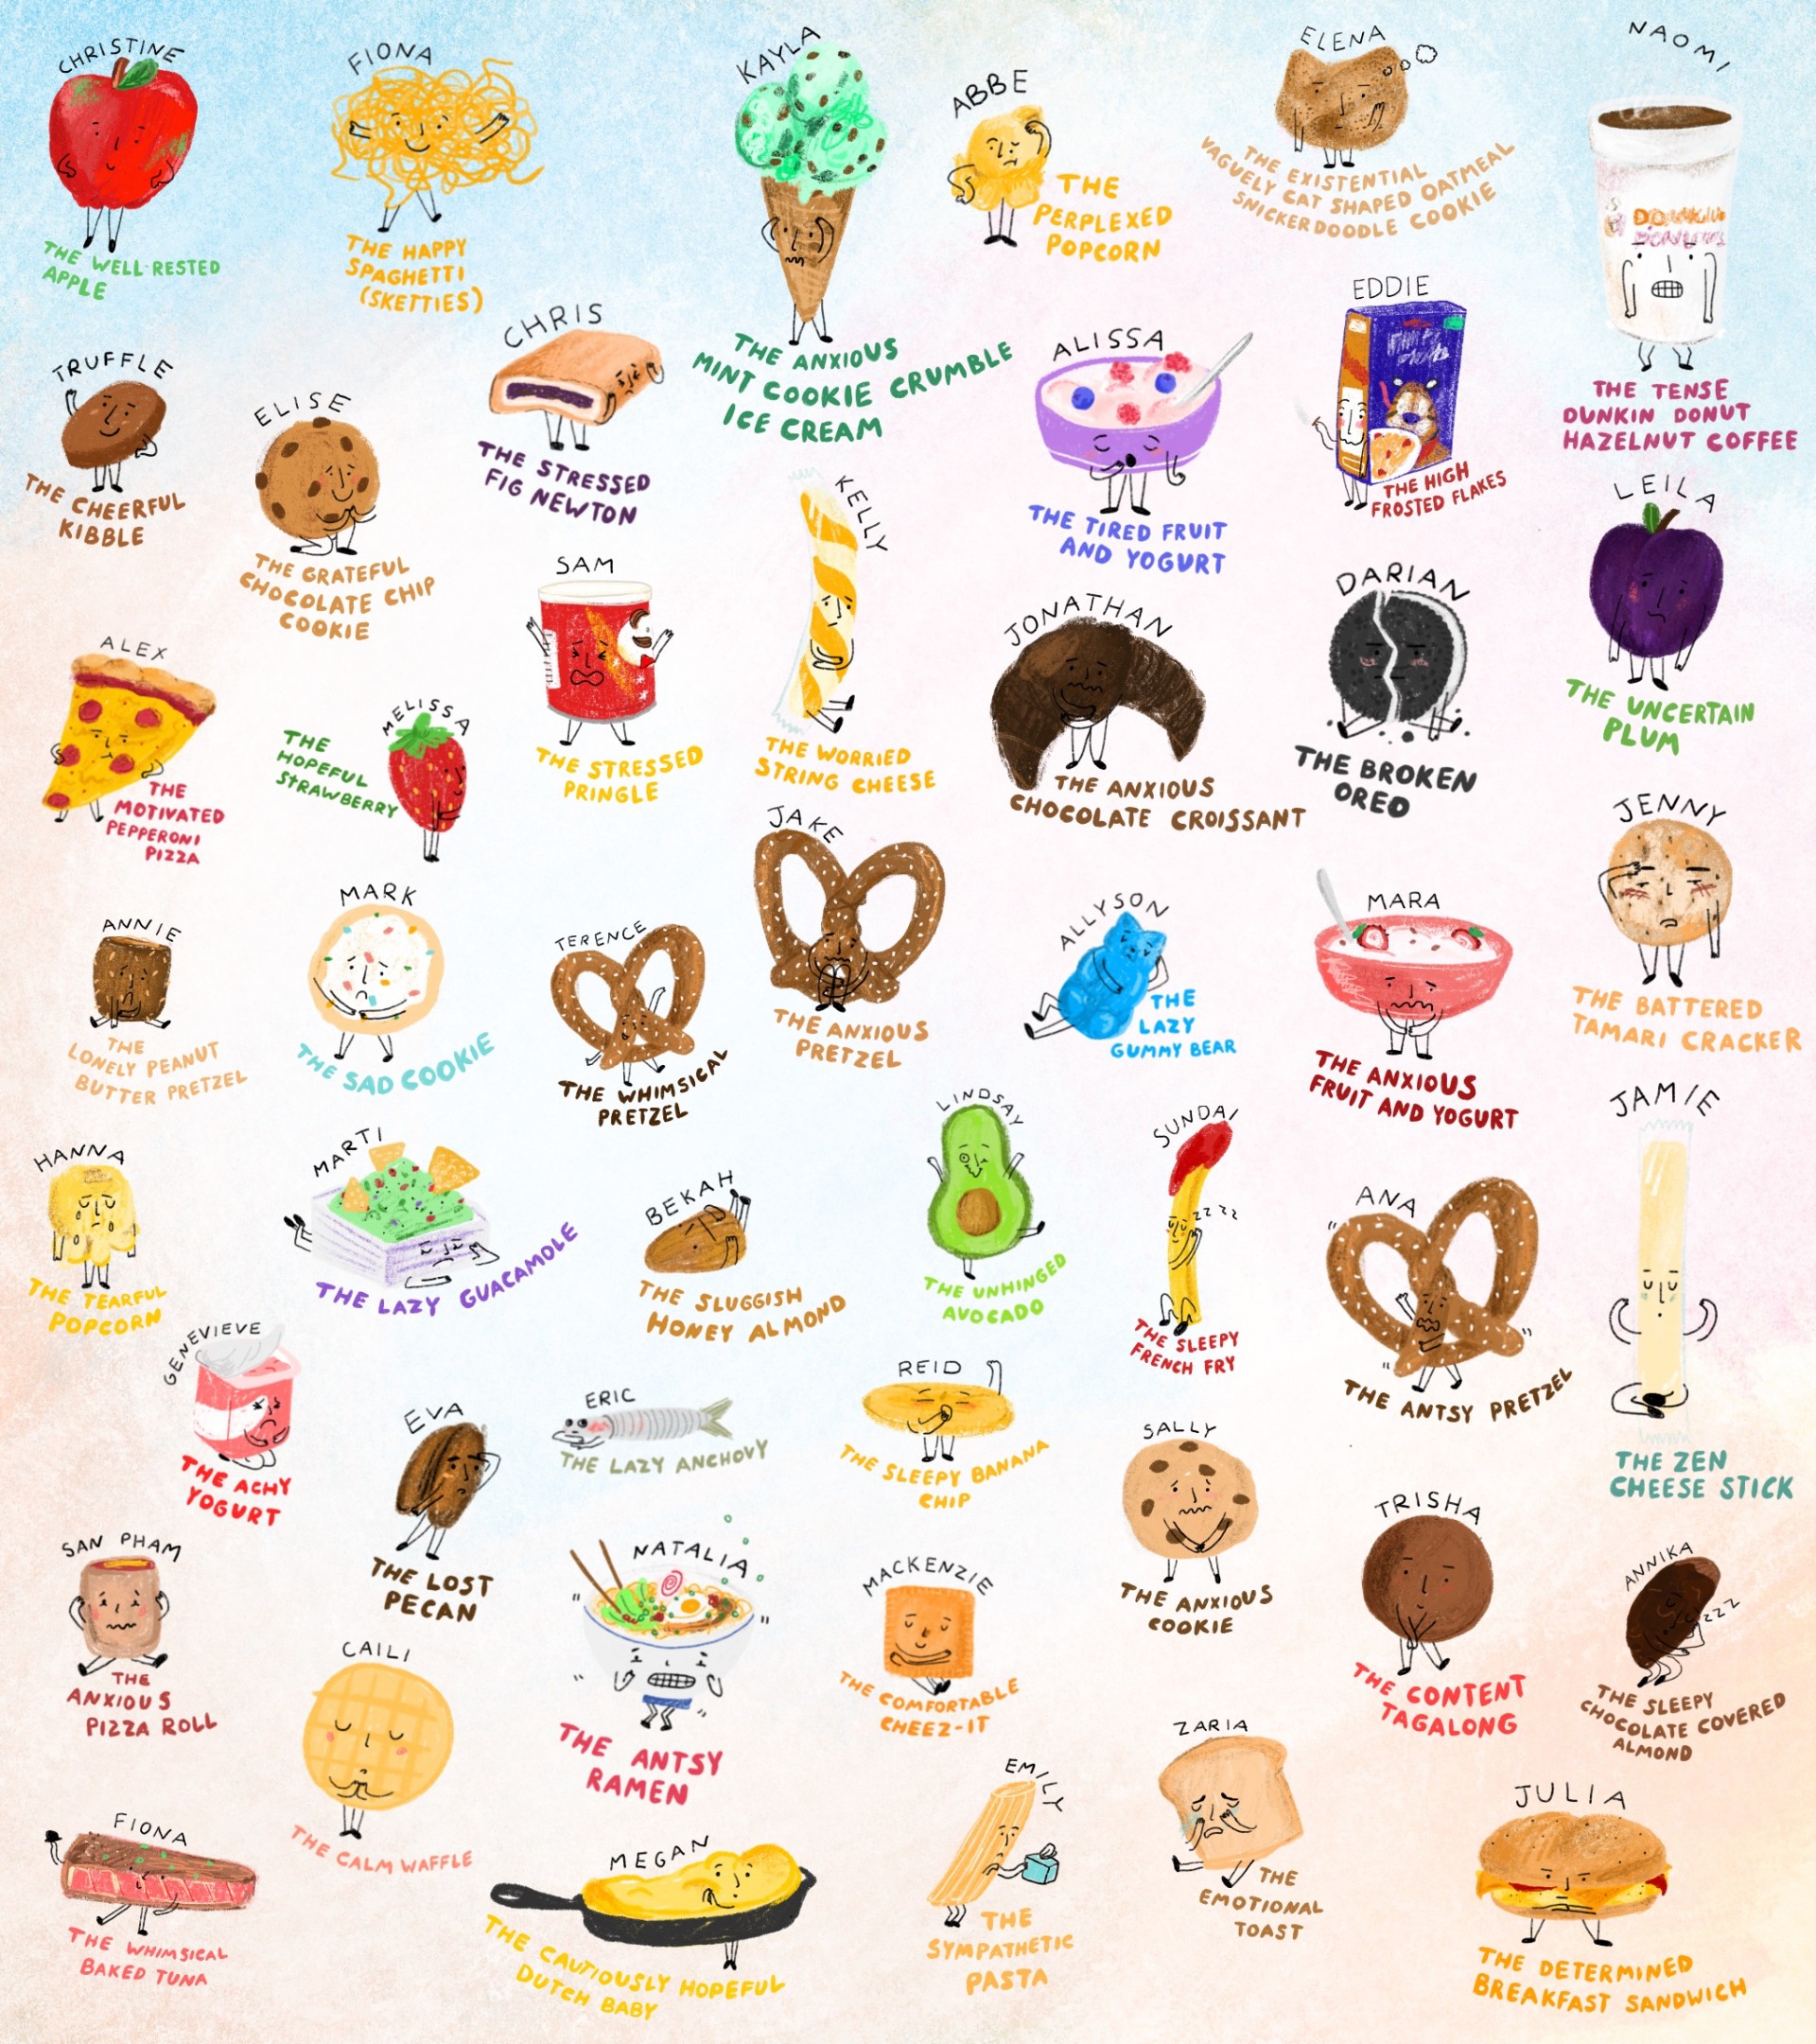 48 small drawings of emotional foods. Each drawing has a name and a description written underneath. White background and illustrations are drawn in color. 